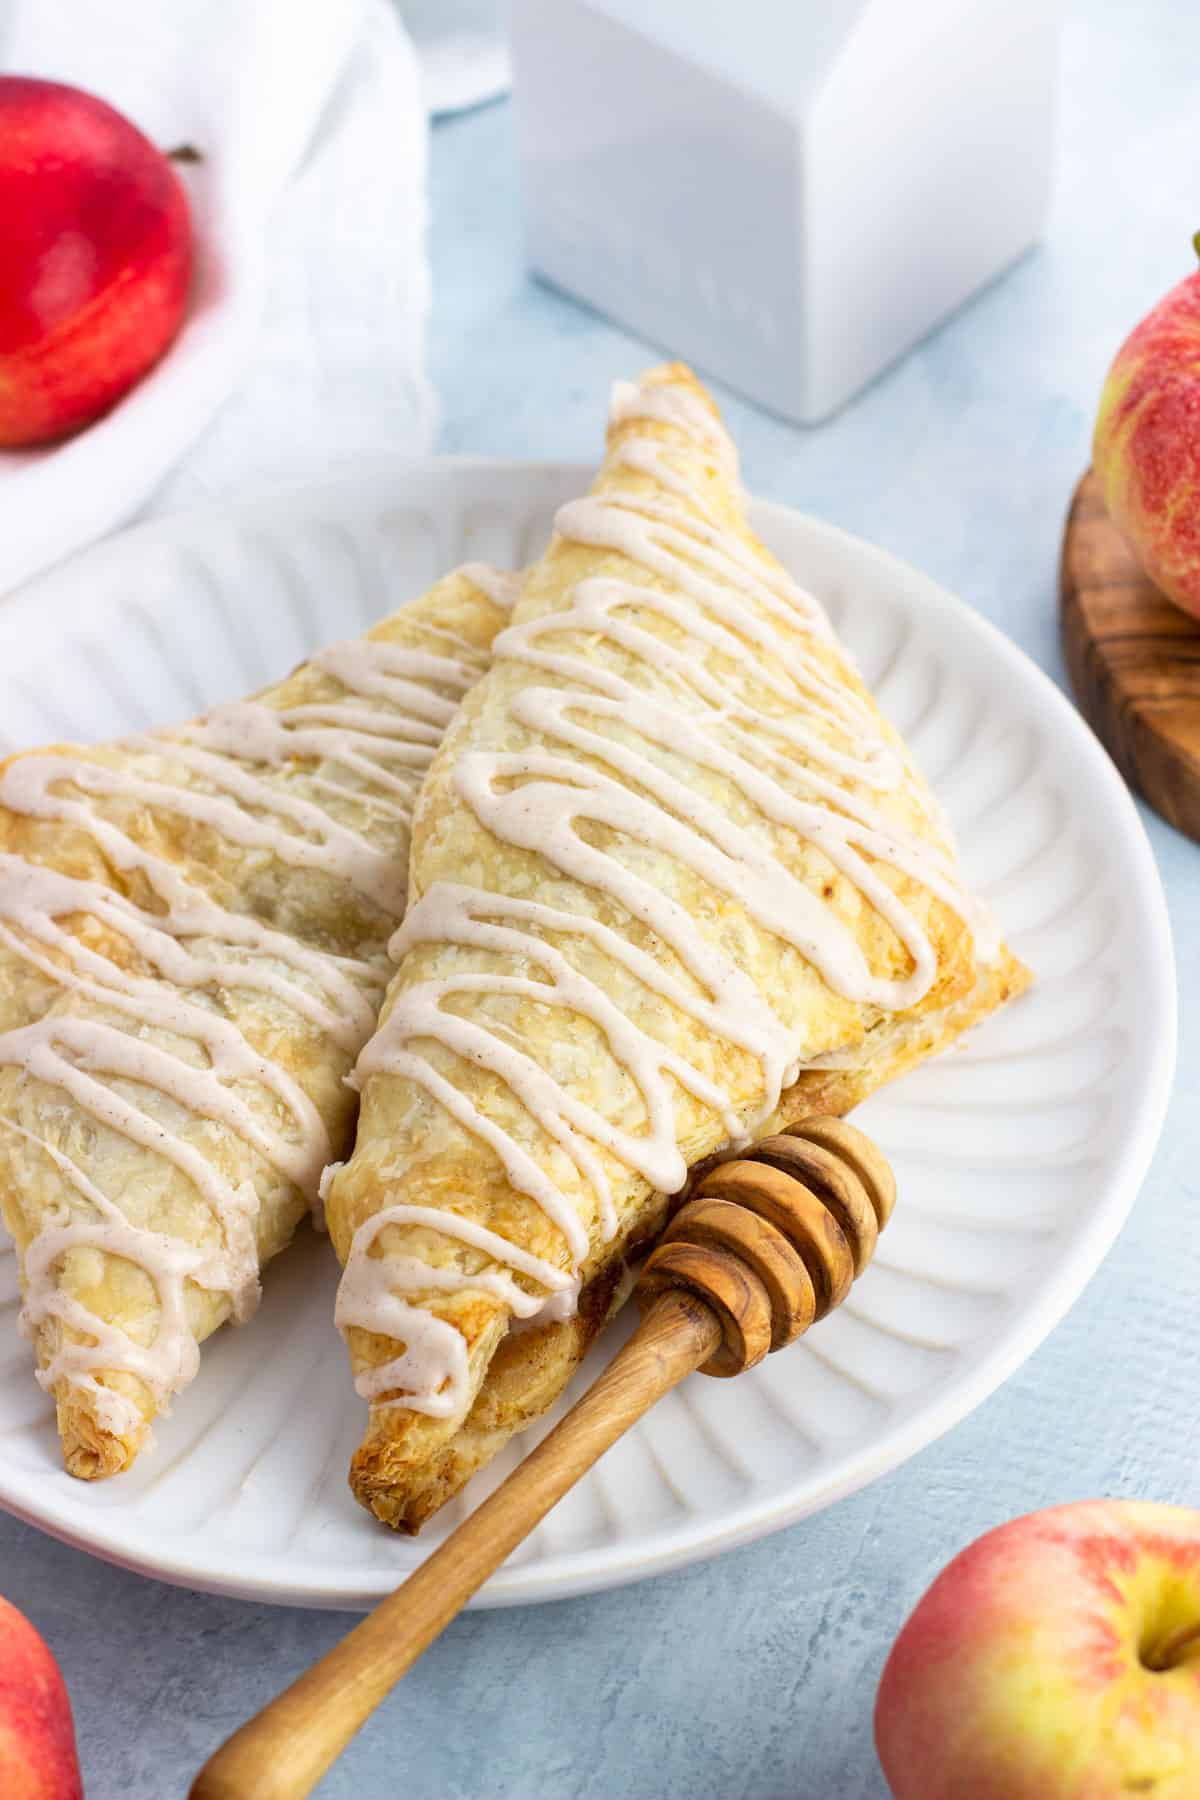 Two apple turnovers on a plate drizzled with cinnamon glaze.